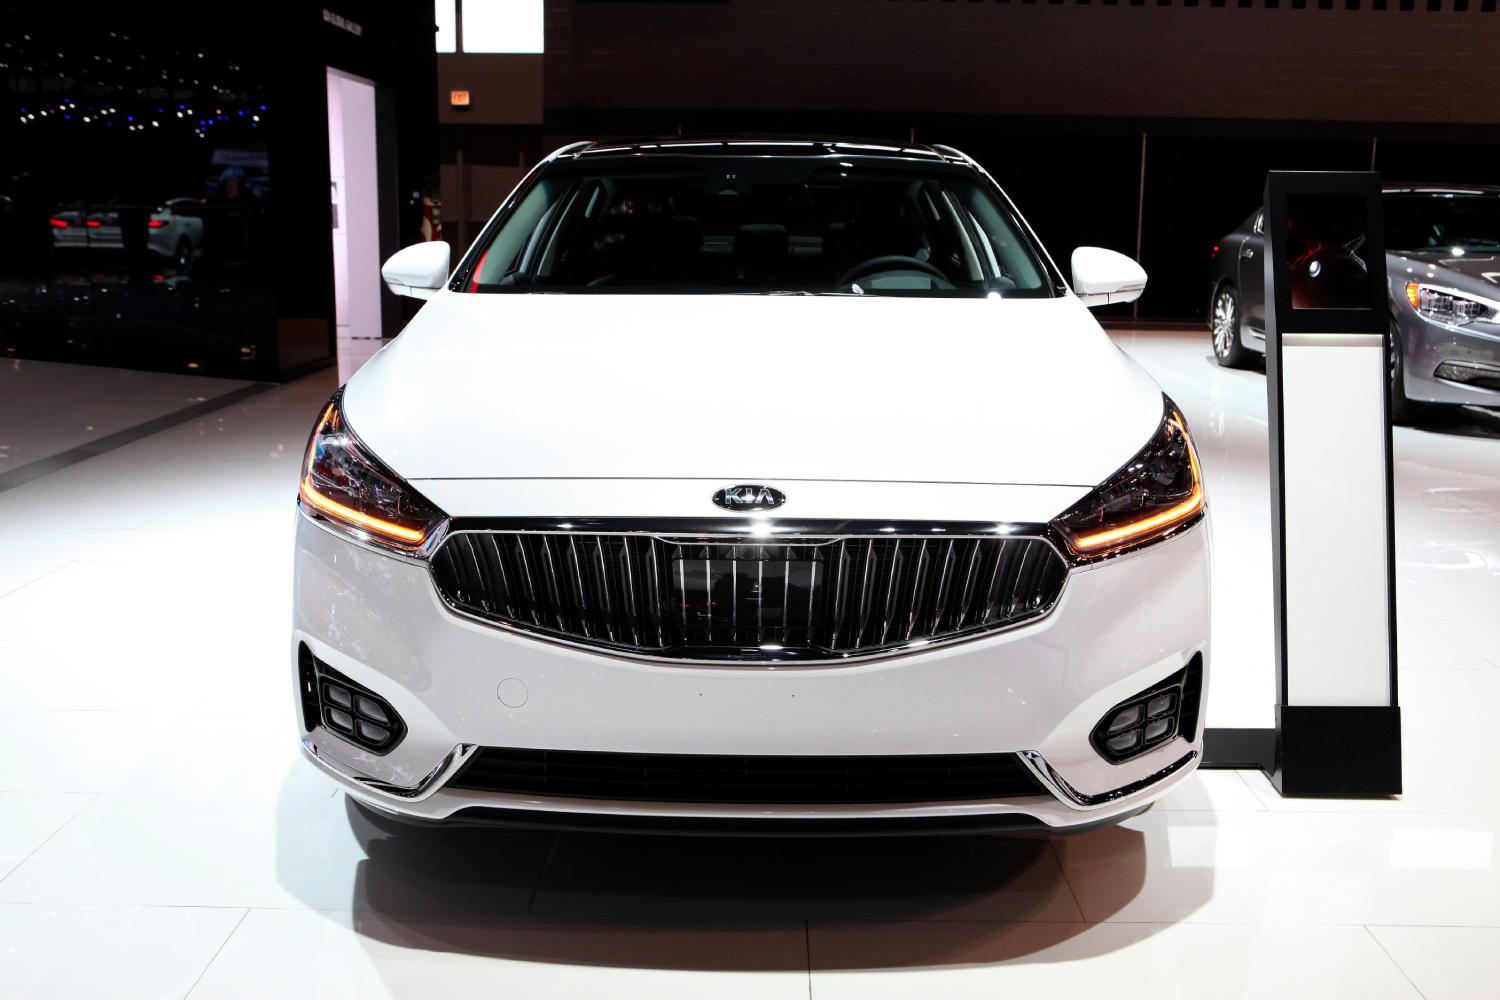 A Kia Cadenza seen from the front at an auto show